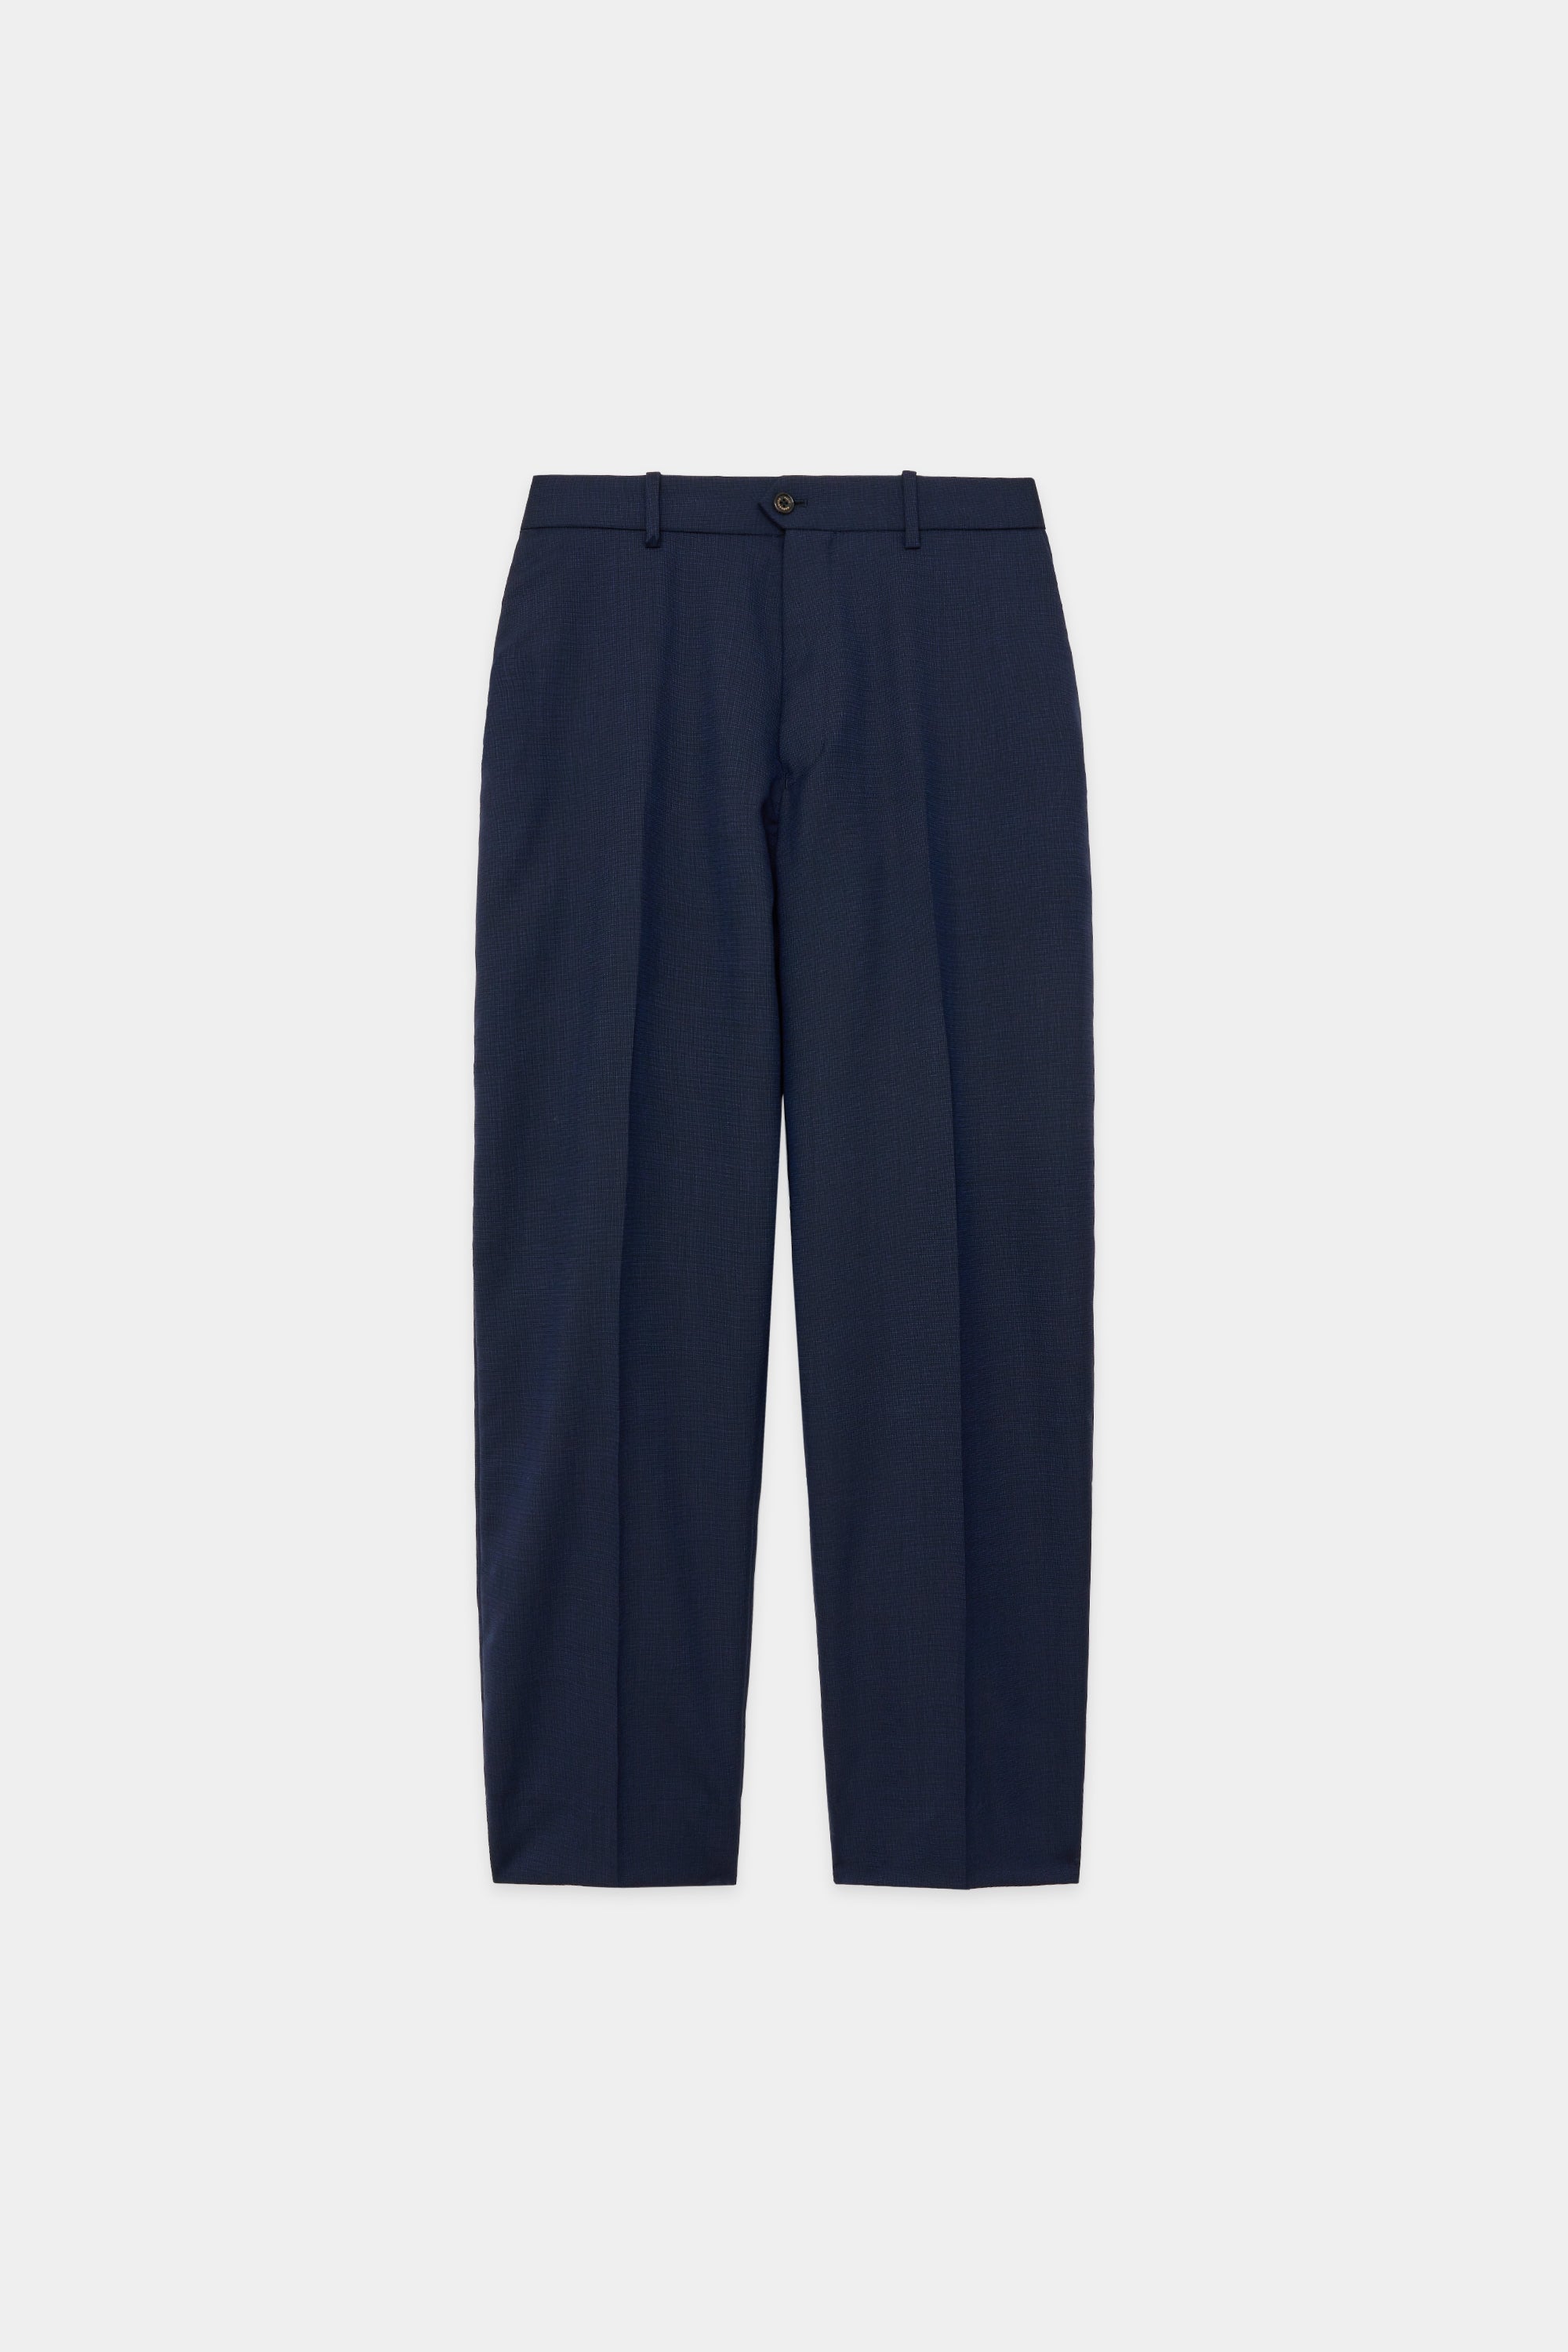 Organic Wool Tropical Flat Front Trousers, Navy – MARKAWARE